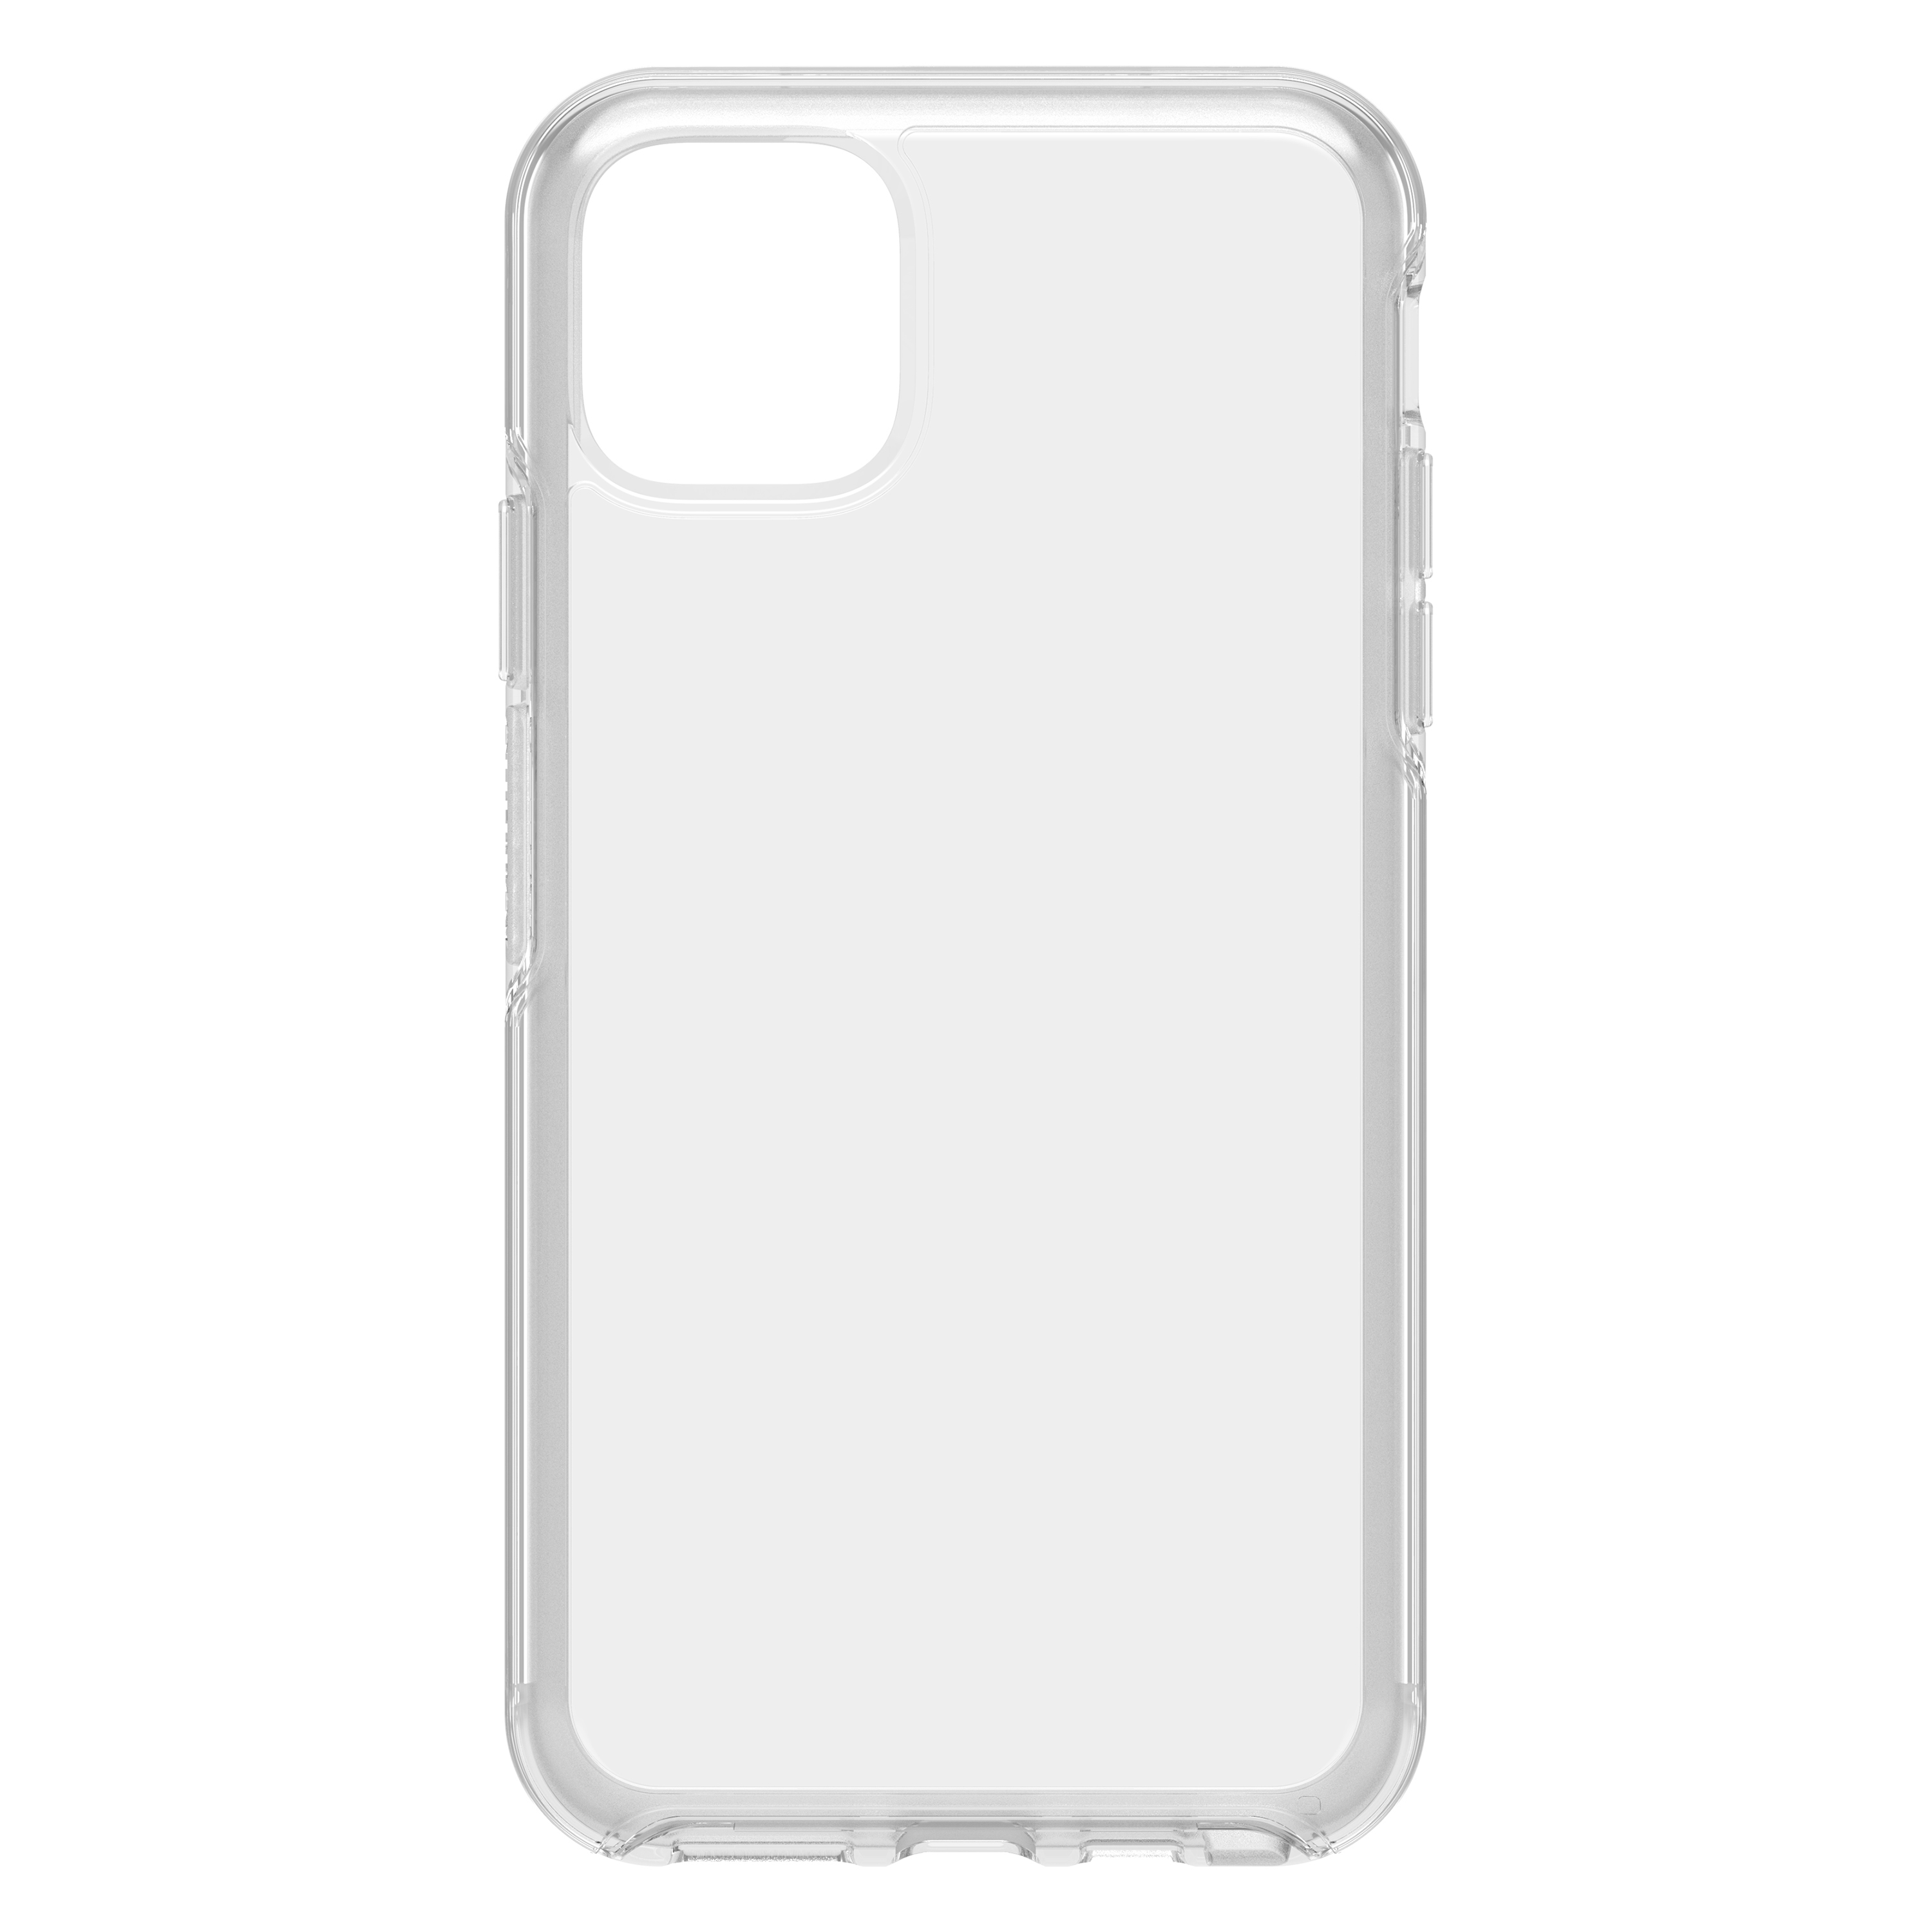 Symmetry Apple, iPhone OTTERBOX 11 Pro Transparent Max, Backcover, Clear,